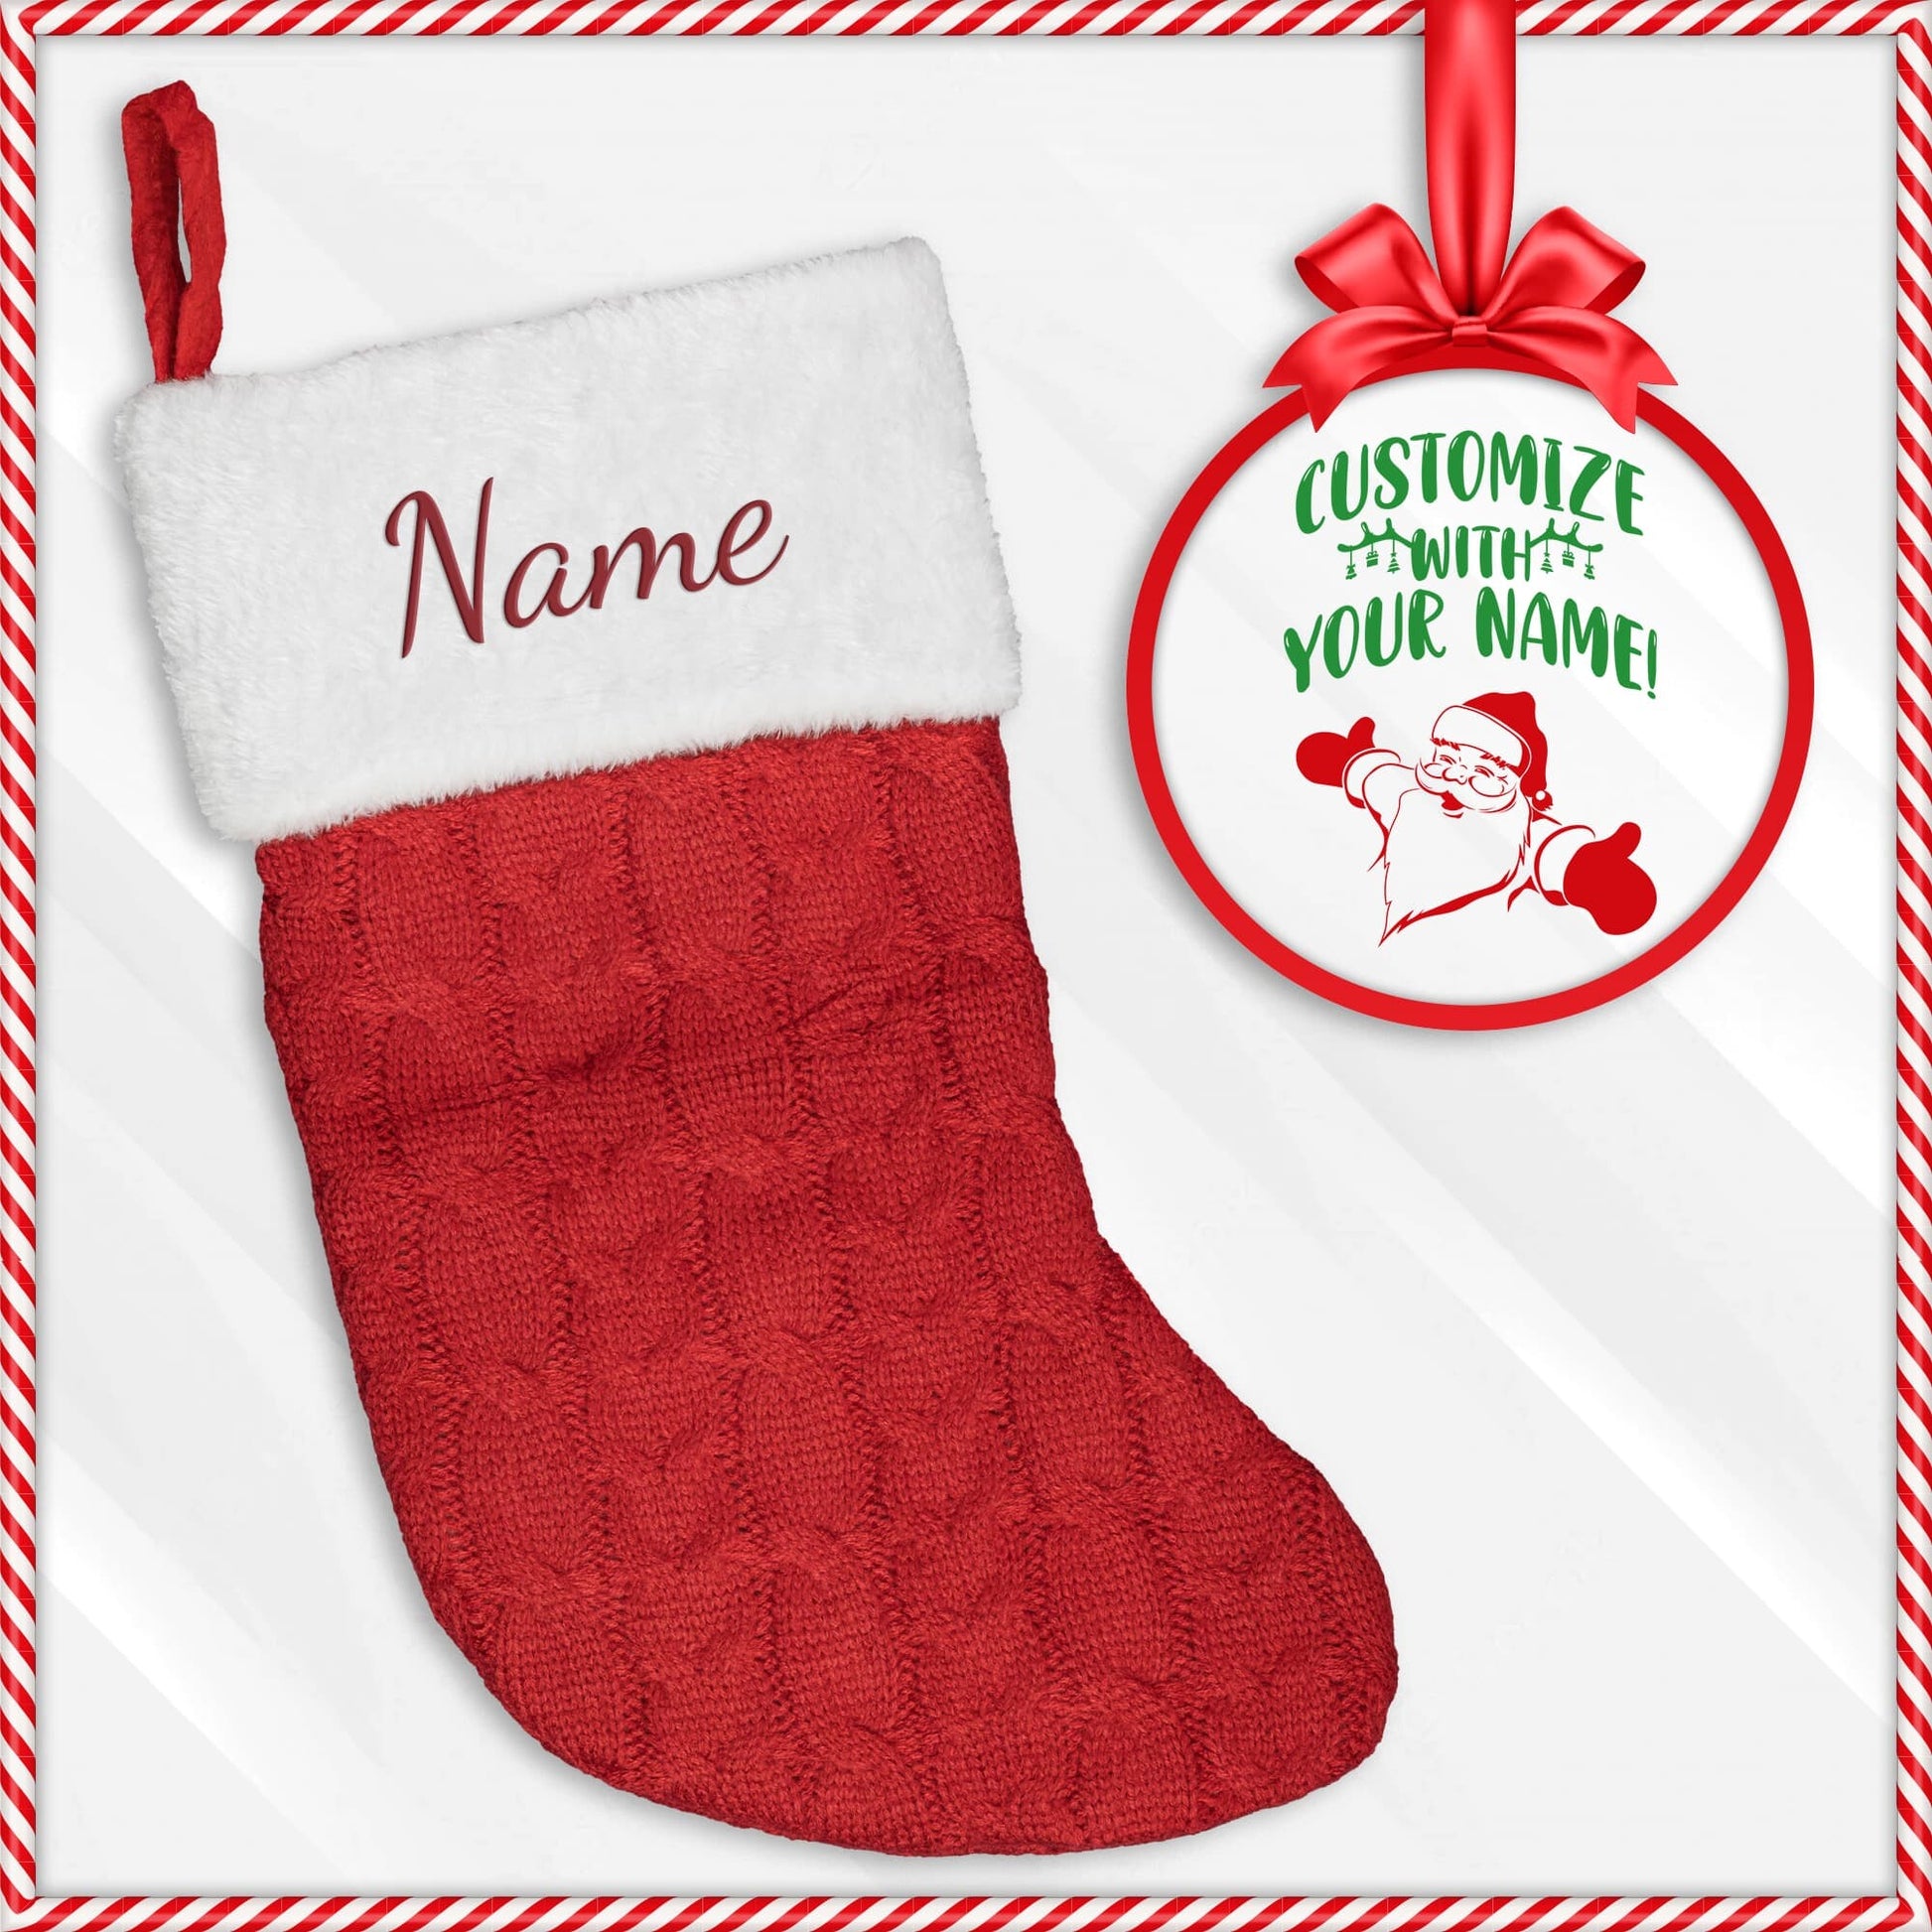 Custom Embroidered Christmas Stocking red